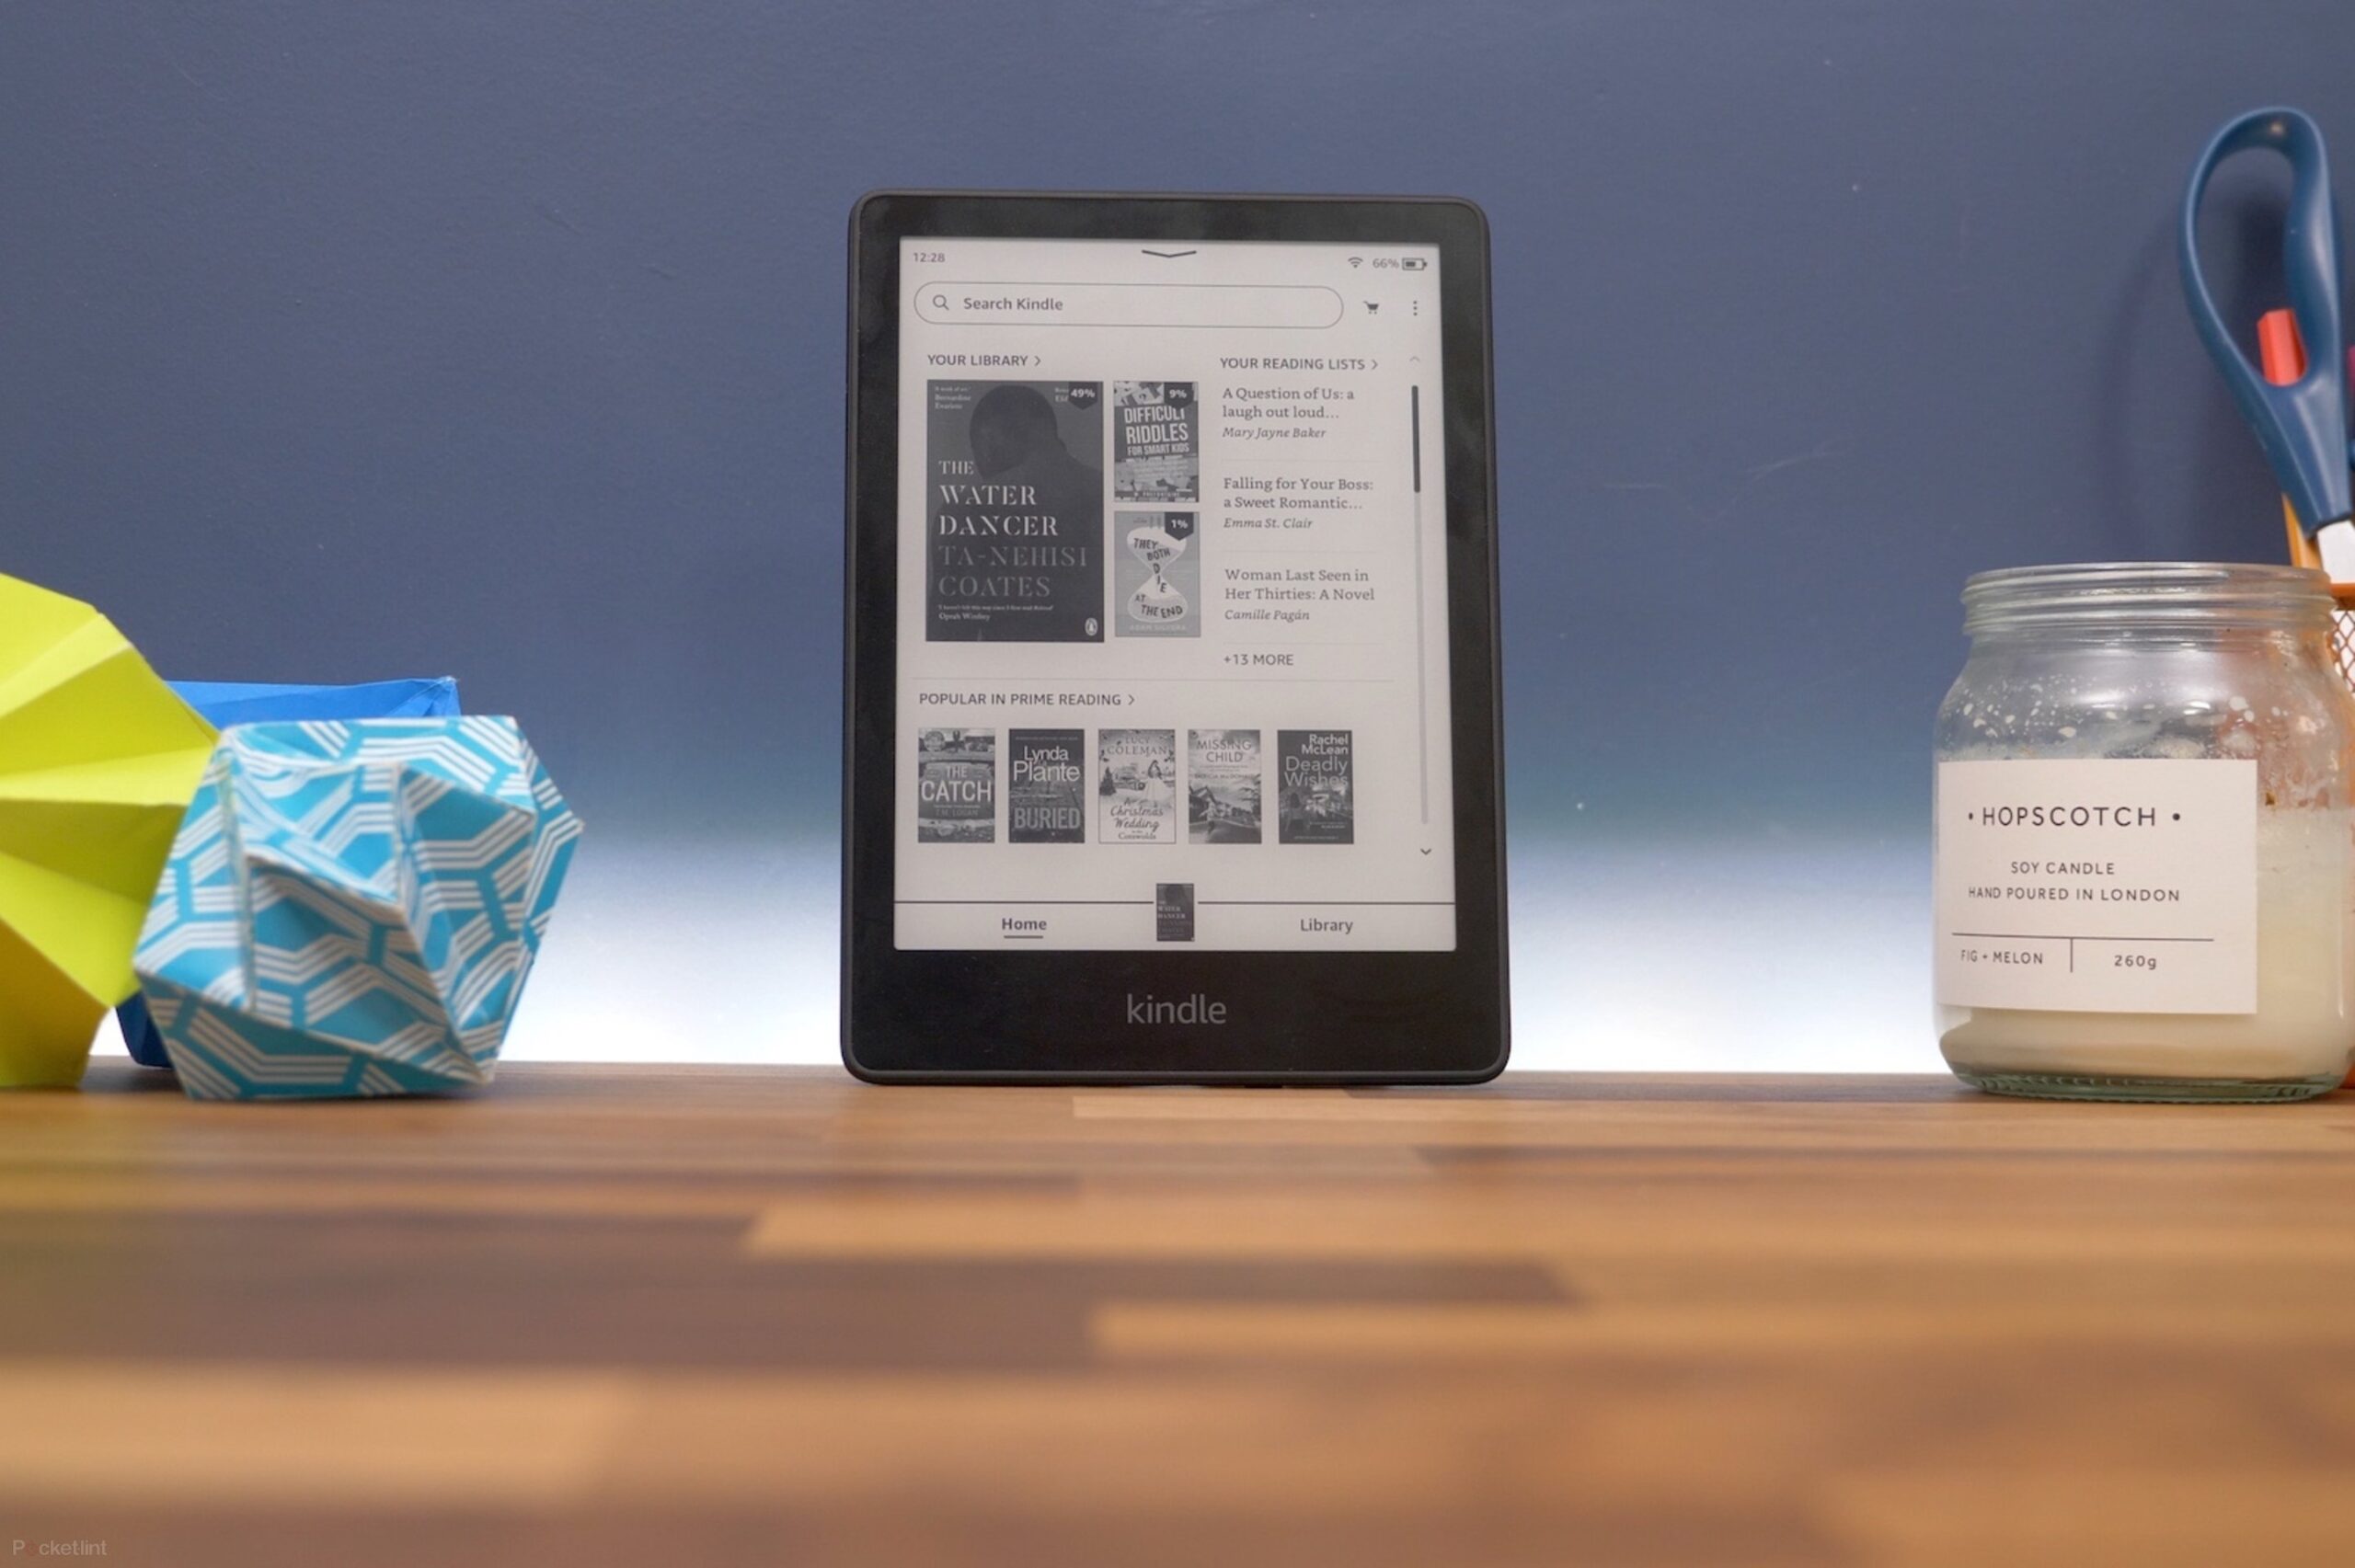 Amazon Kindle Paperwhite 11th generation has been upgraded to 16GB